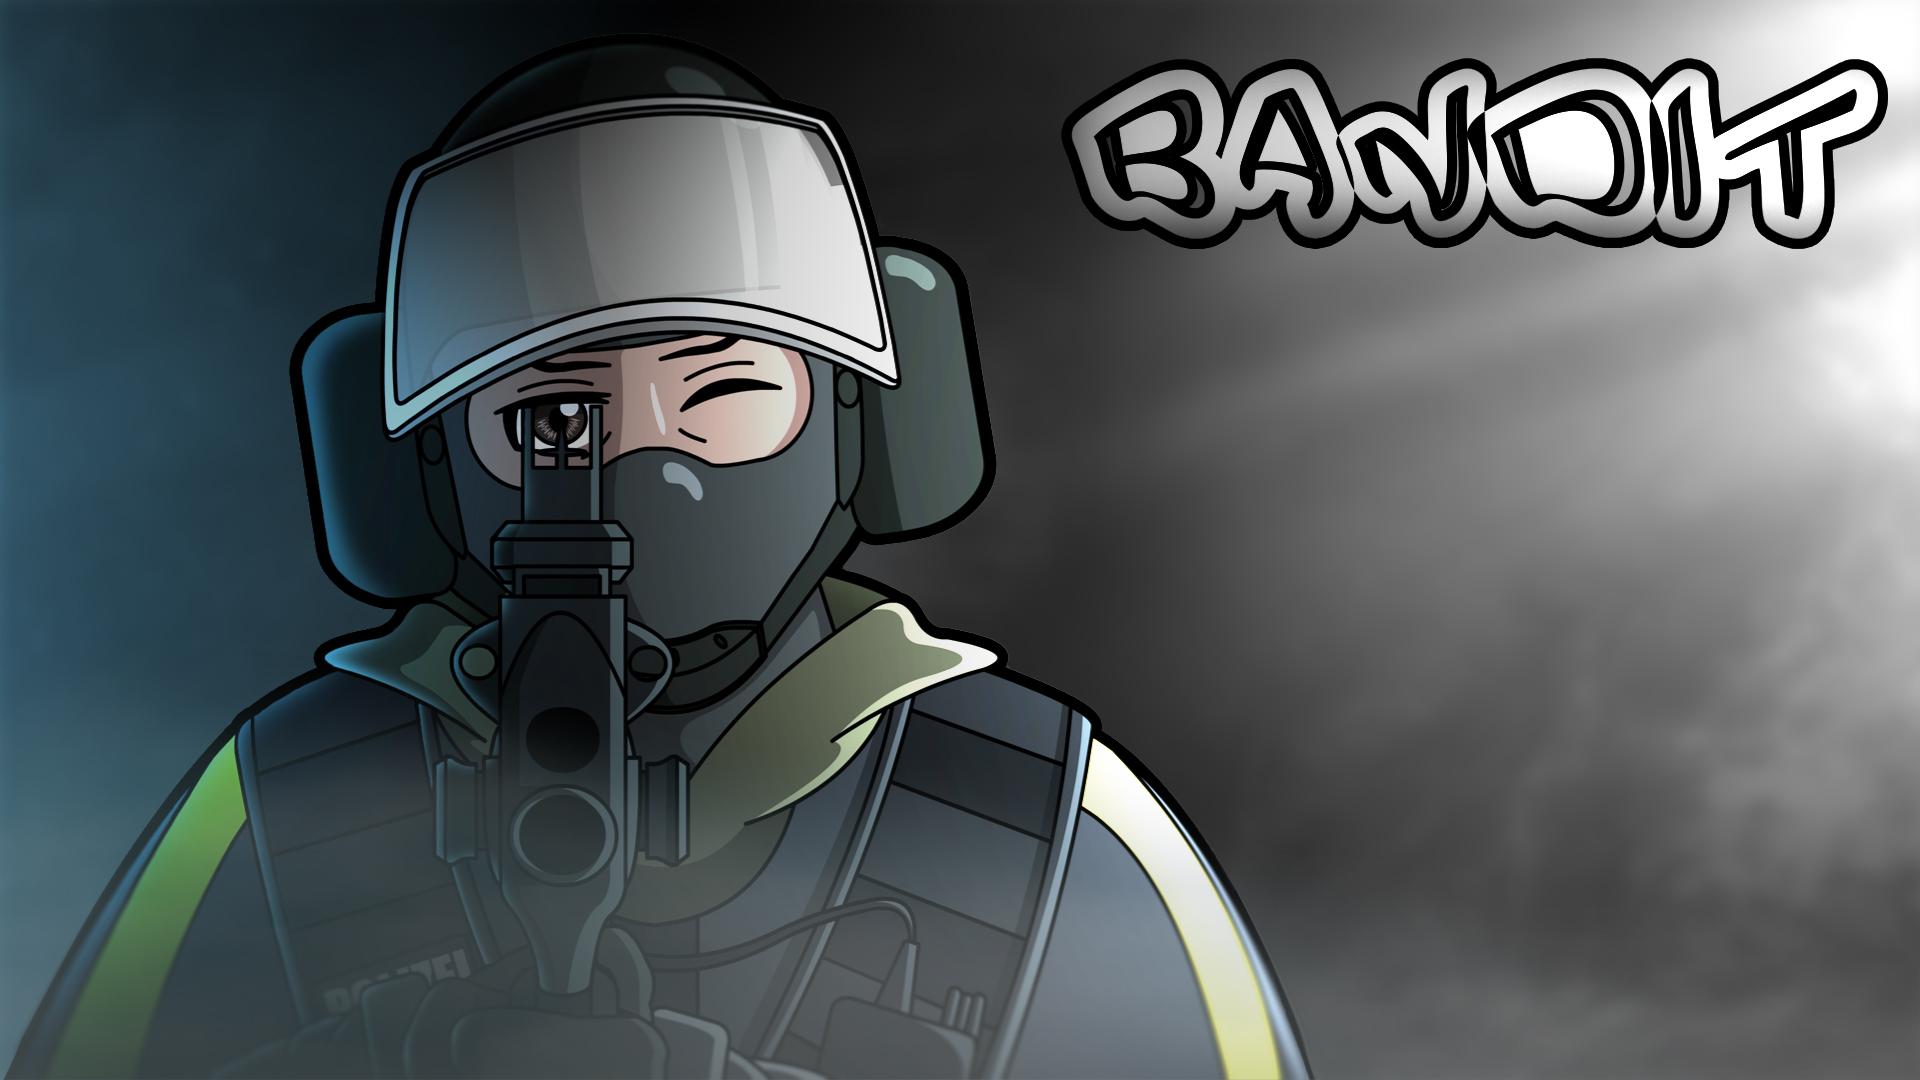 Bandit Full HD (1920x1080) Wallpaper (I know I posted another